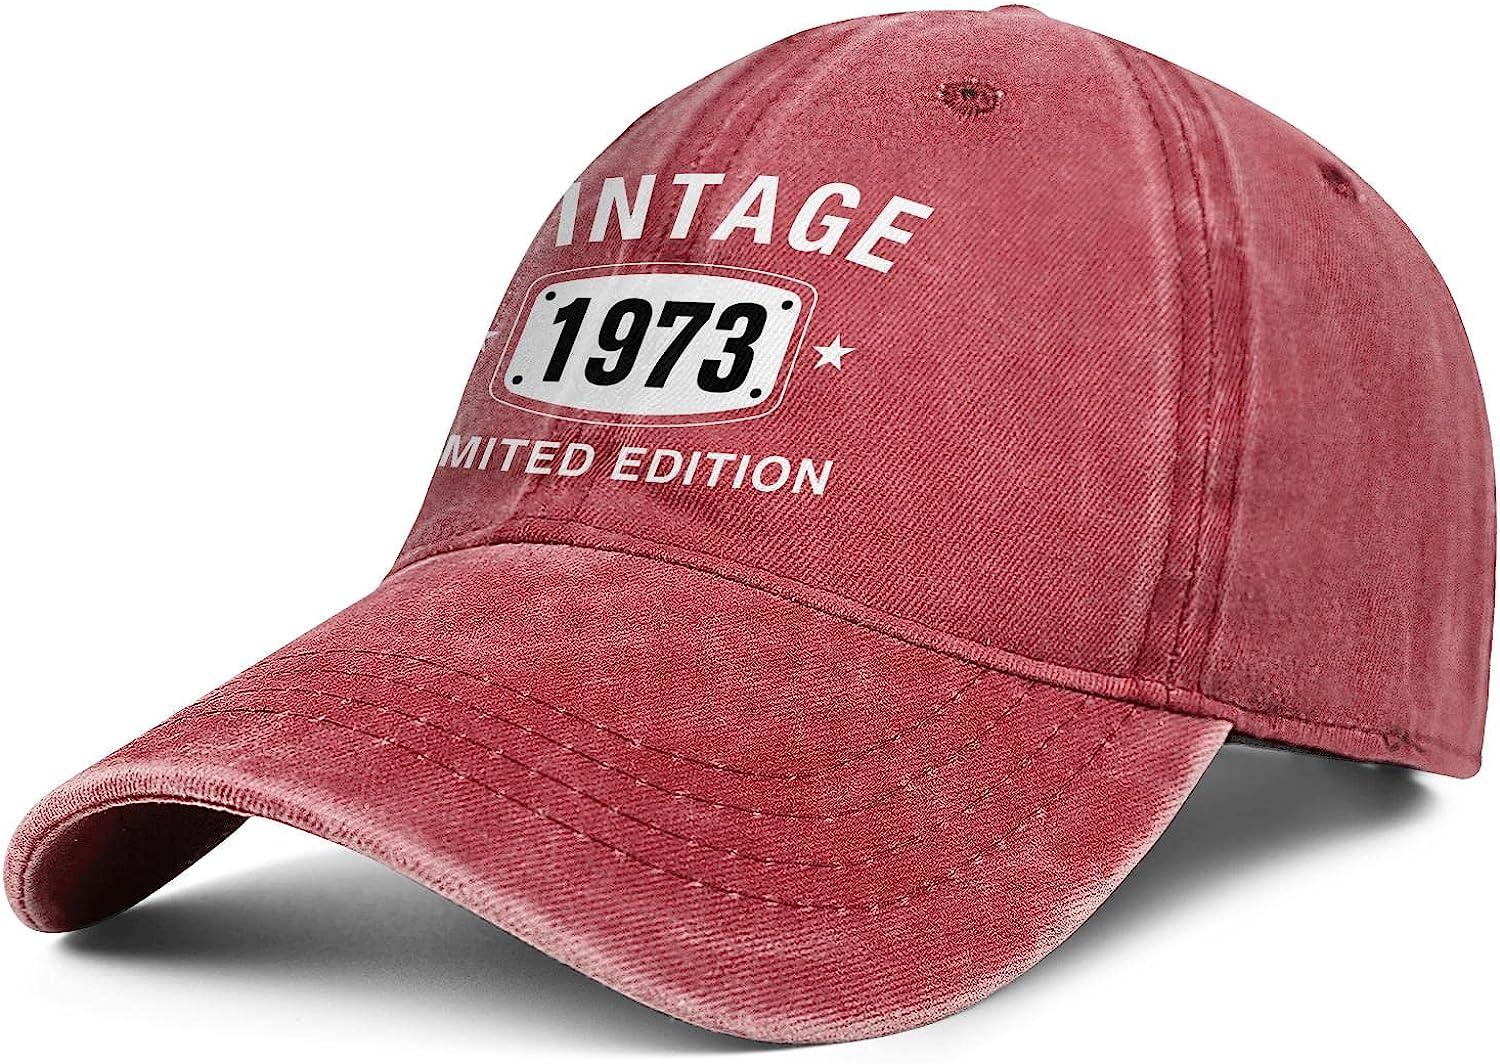 Cool Hats for Men Vintage 1982 Outdoor Hat for Women's Fashion Caps Trendy